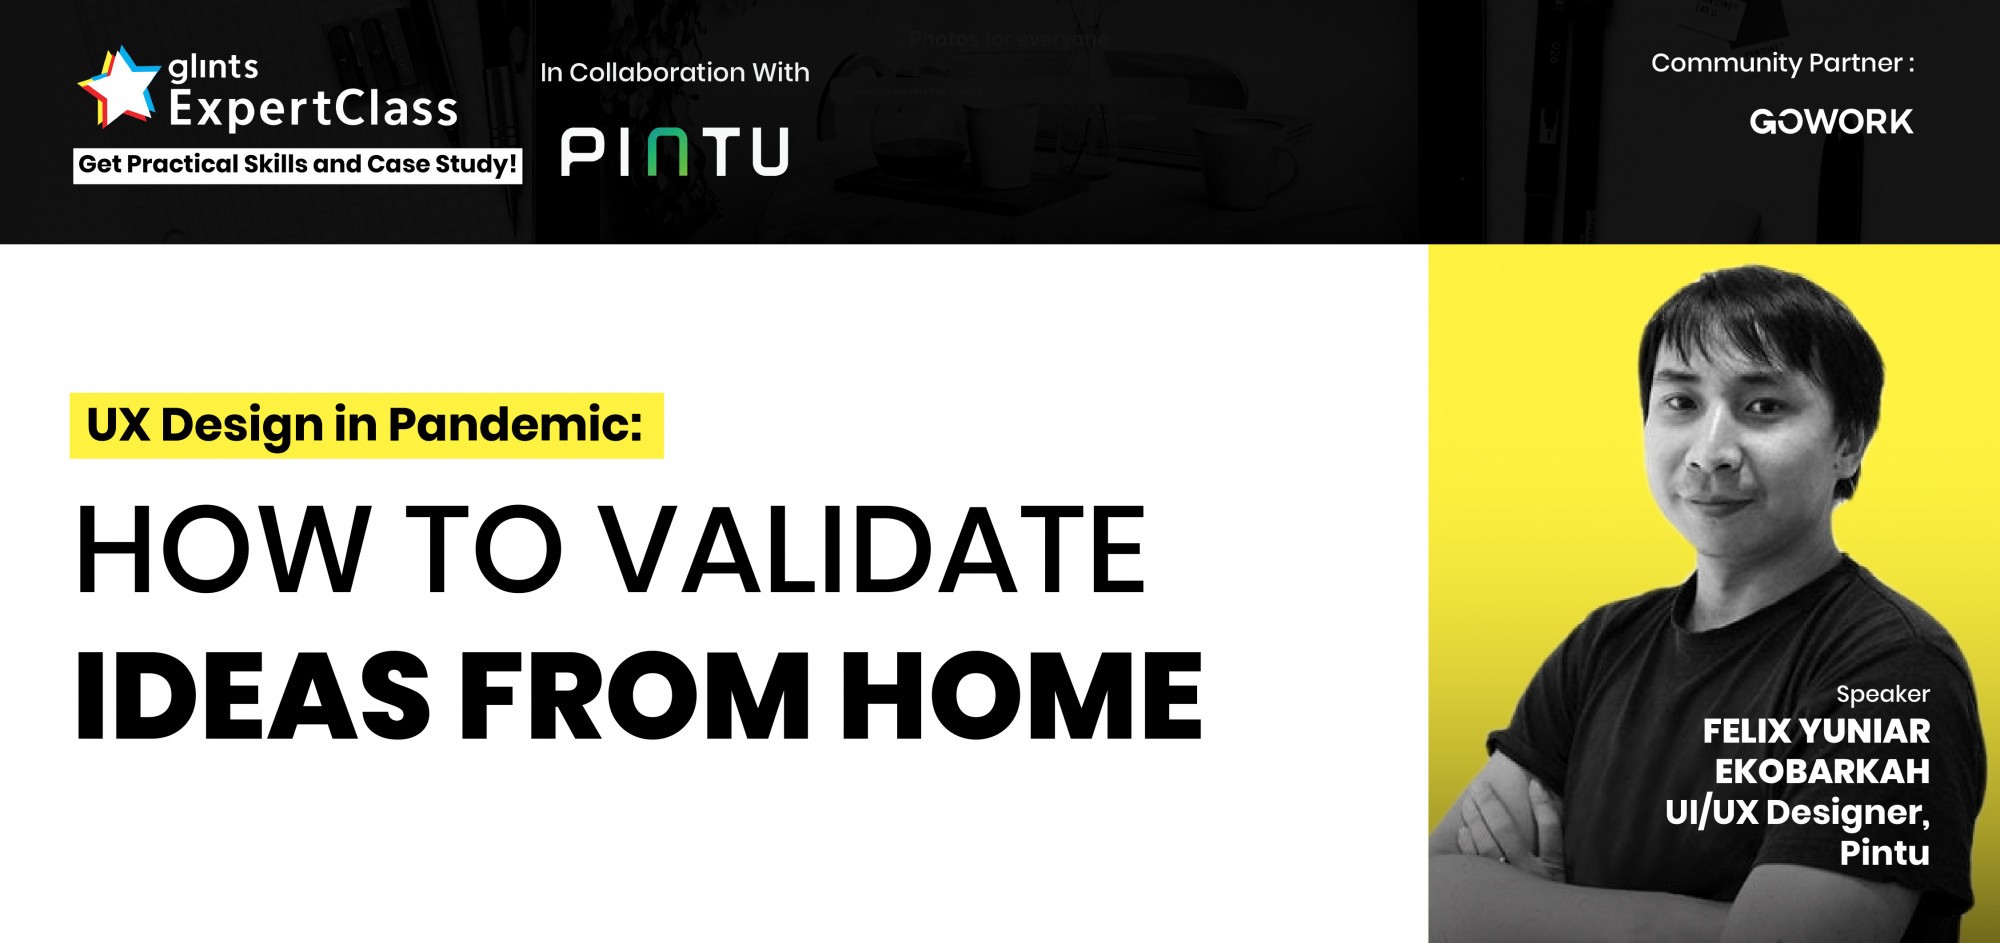 [Online Glints ExpertClass] UX Design in Pandemic: How To Validate Ideas From Home